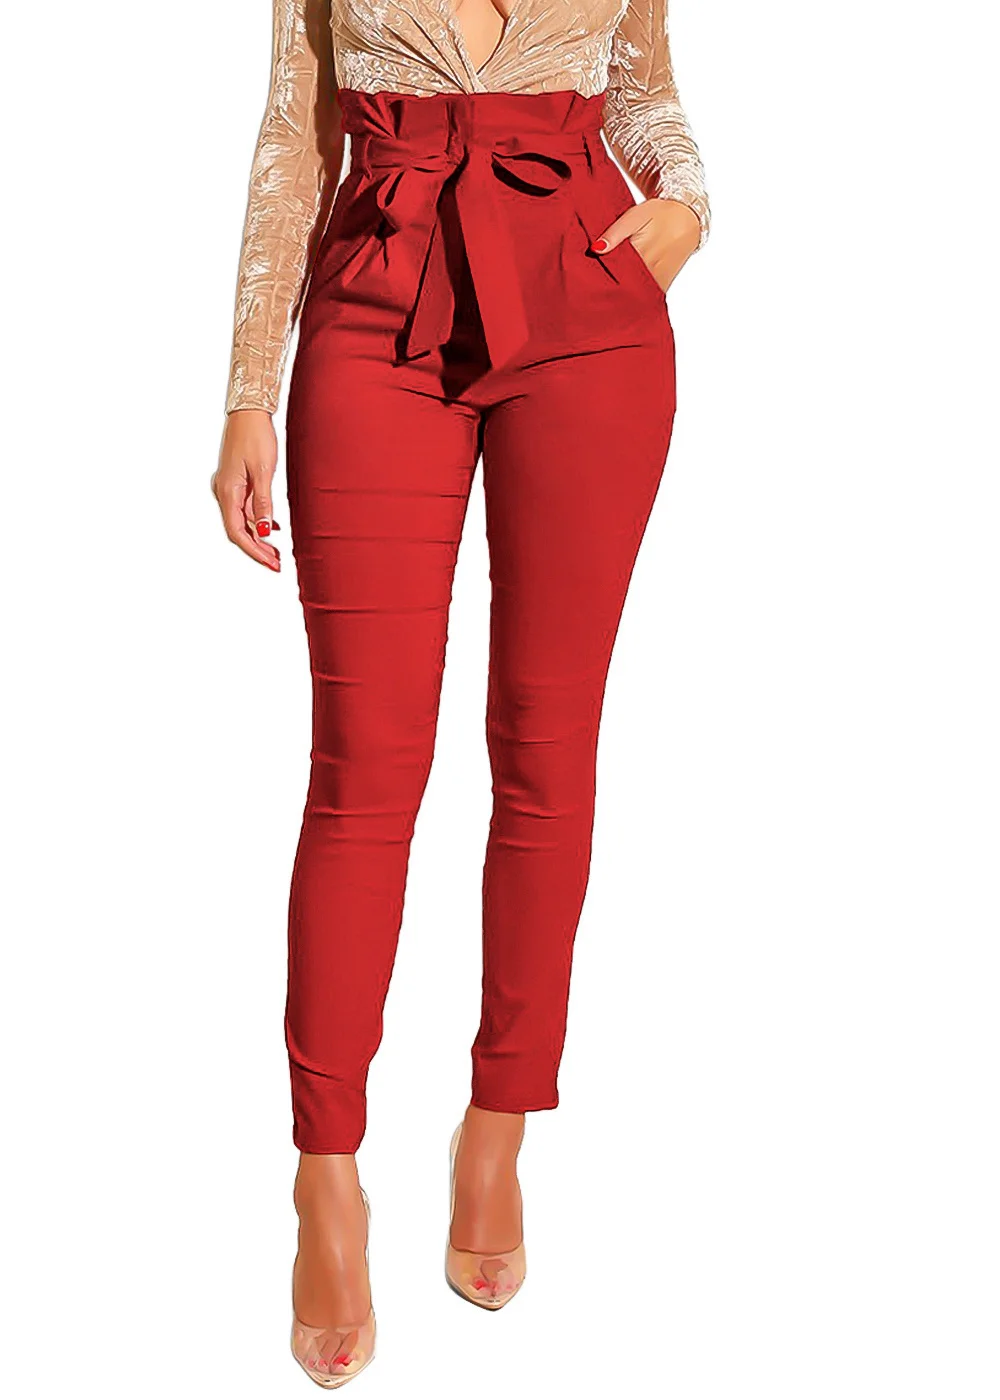 Dressmecb Solid Red Casual Pants Women Pants High Waist Ruched Bow Pencil Pants Female Summer Fashion Autumn Long Trousers 2021 plus size clothing